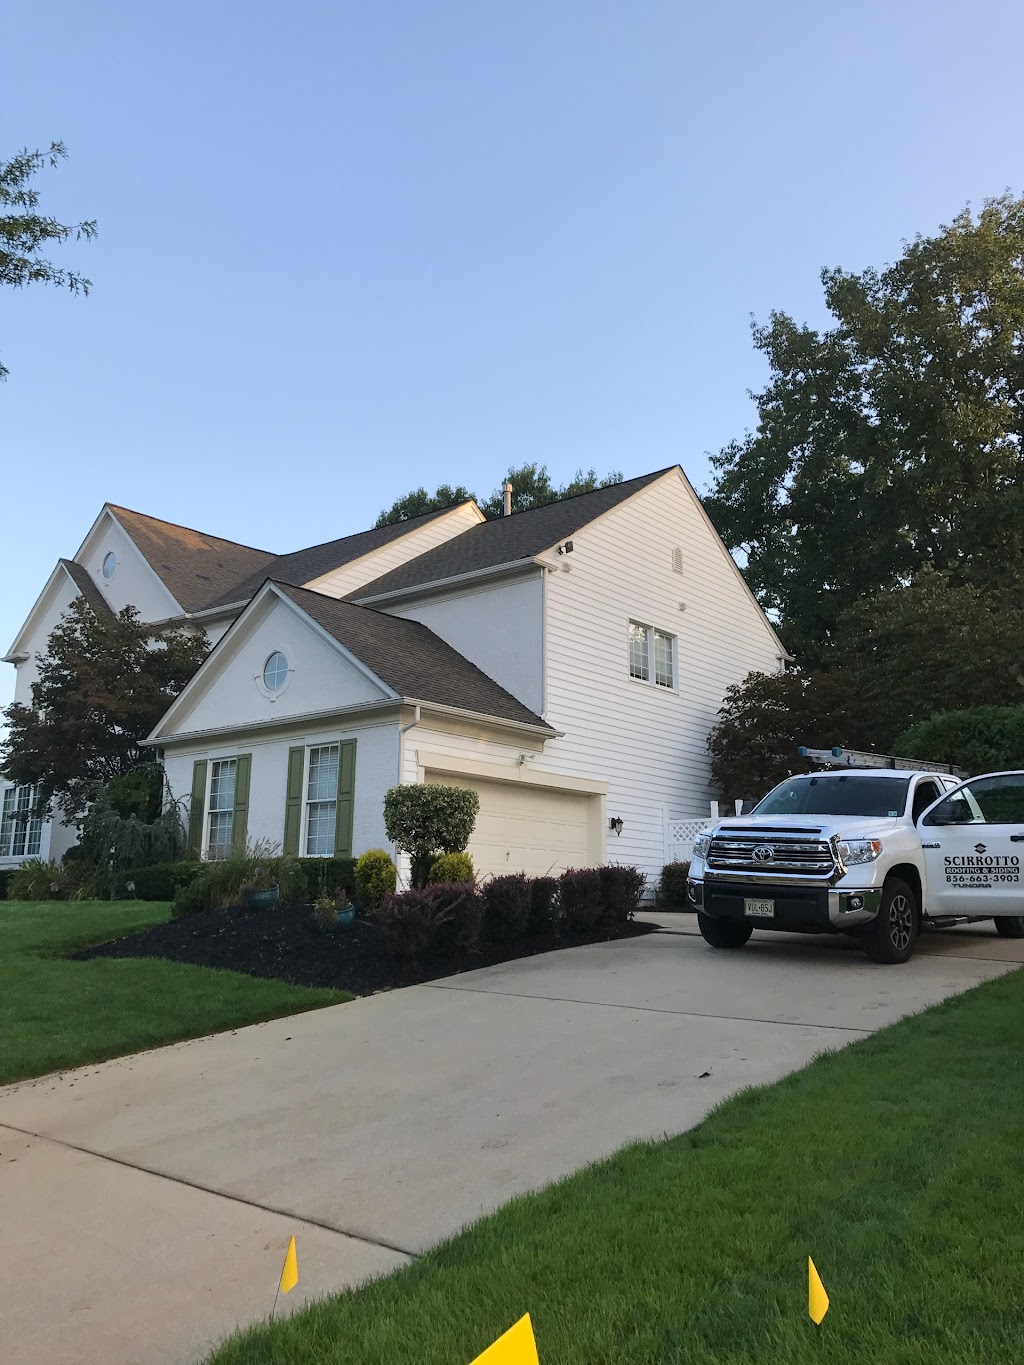 Scirrotto Roofing & Siding | 404 Church Rd, Cherry Hill, NJ 08002 | Phone: (856) 333-2970